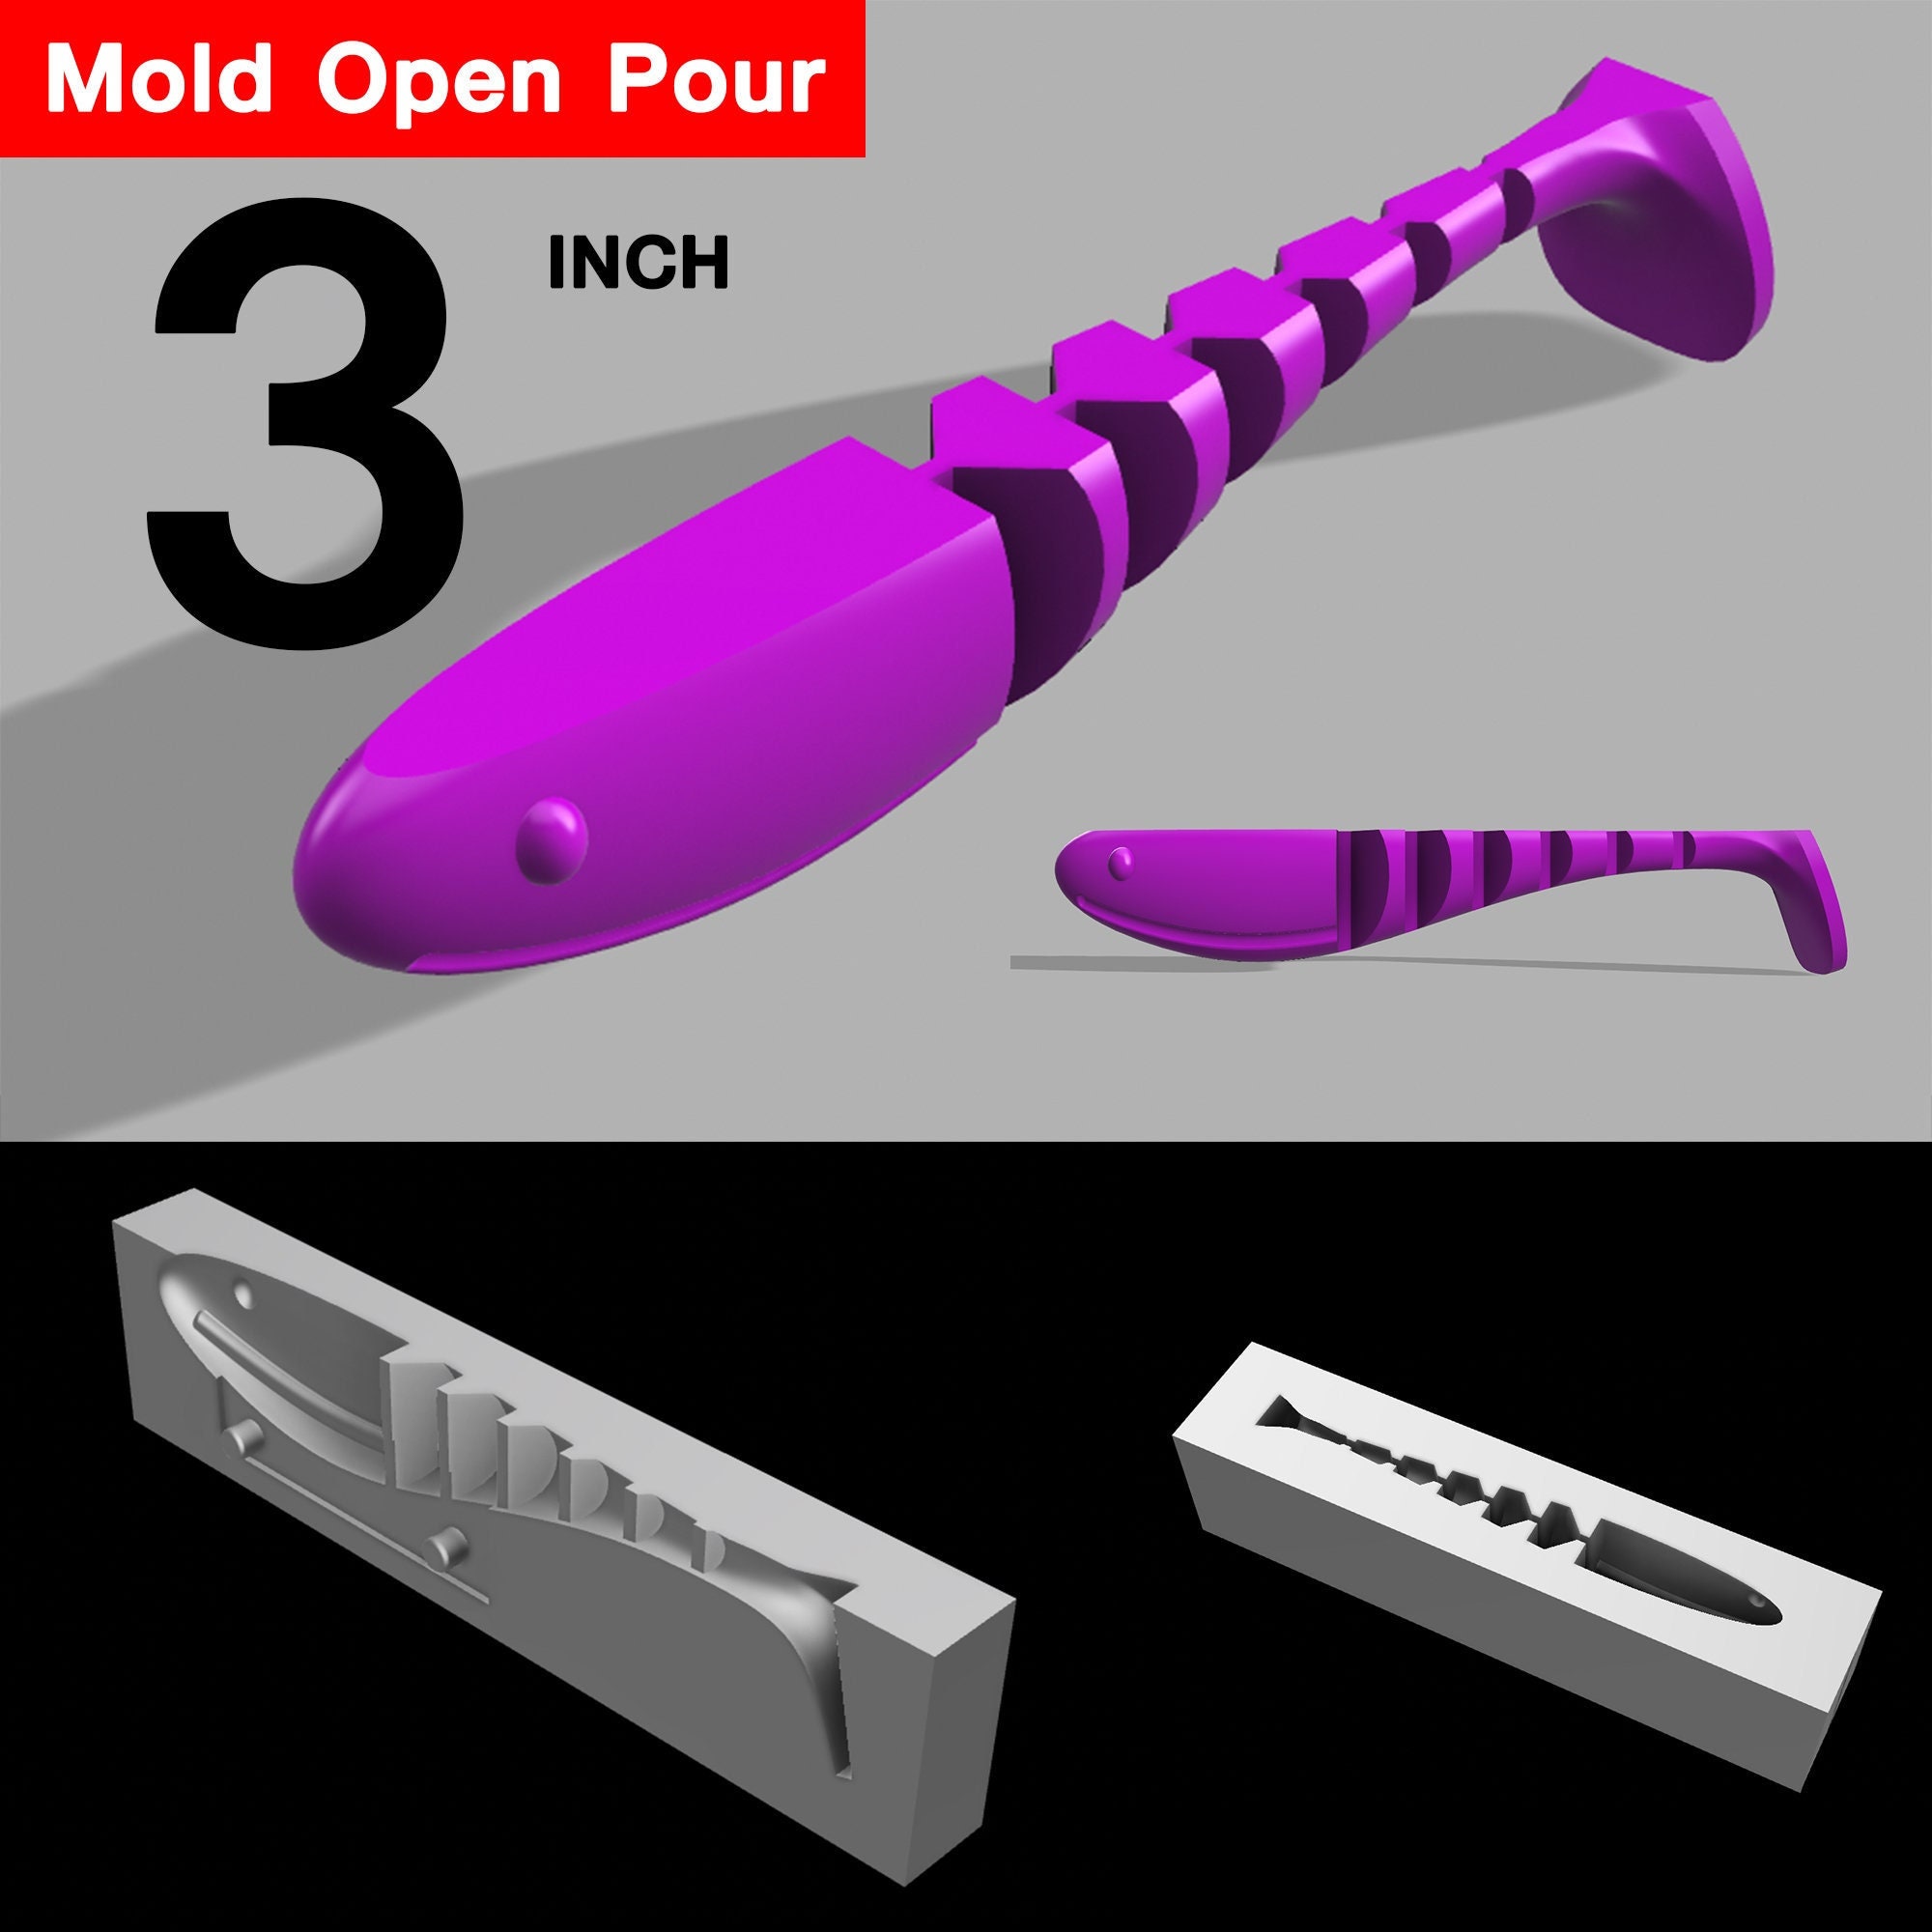 Digital File : Open Pour Mold Shad 3 Stl, Step File for Cnc and 3d